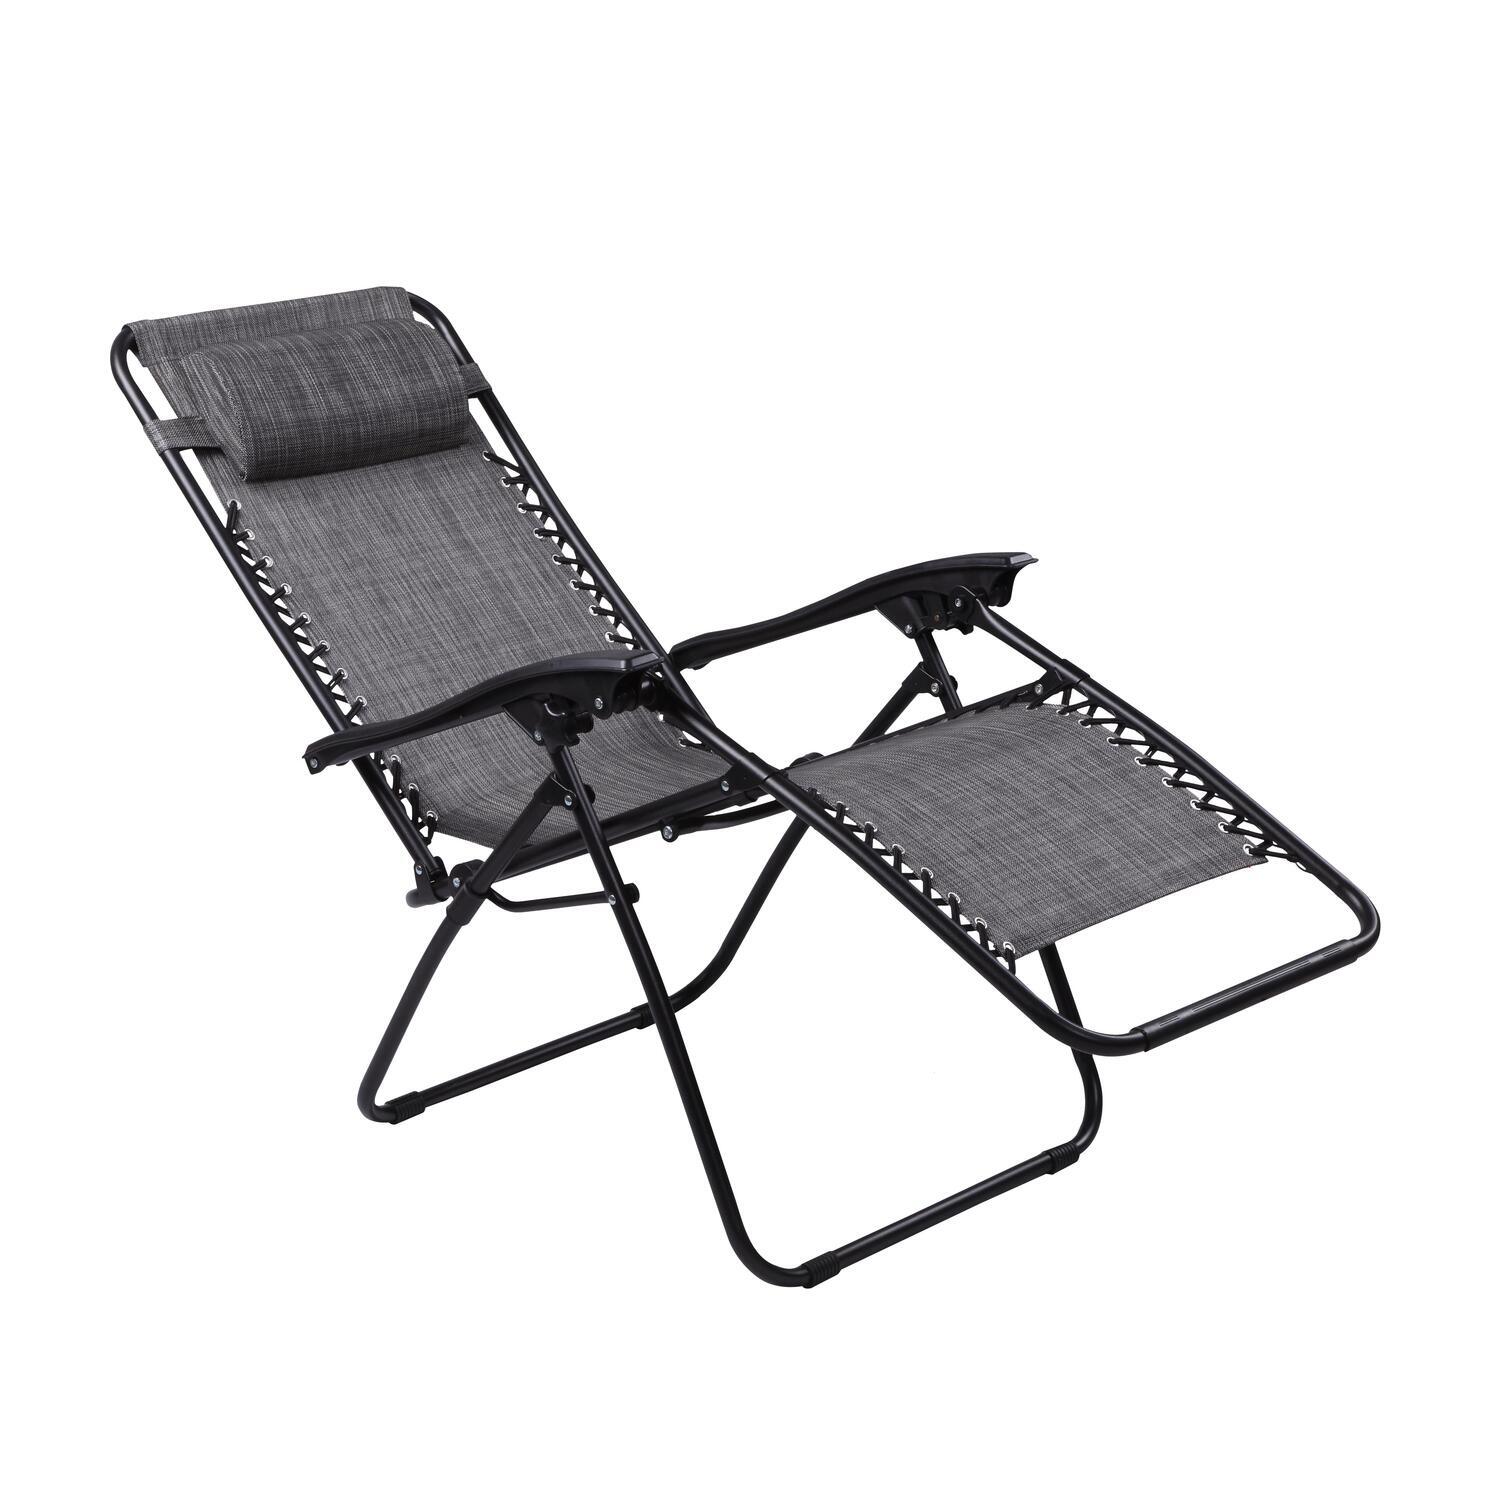 Patio Lounge Chairs Set of 2 Lounge Chairs for Outside Outdoor Lounge Chairs Tanning Chair Folding Lounge Chair Pack of 2 - Color: Gray - image 3 of 6